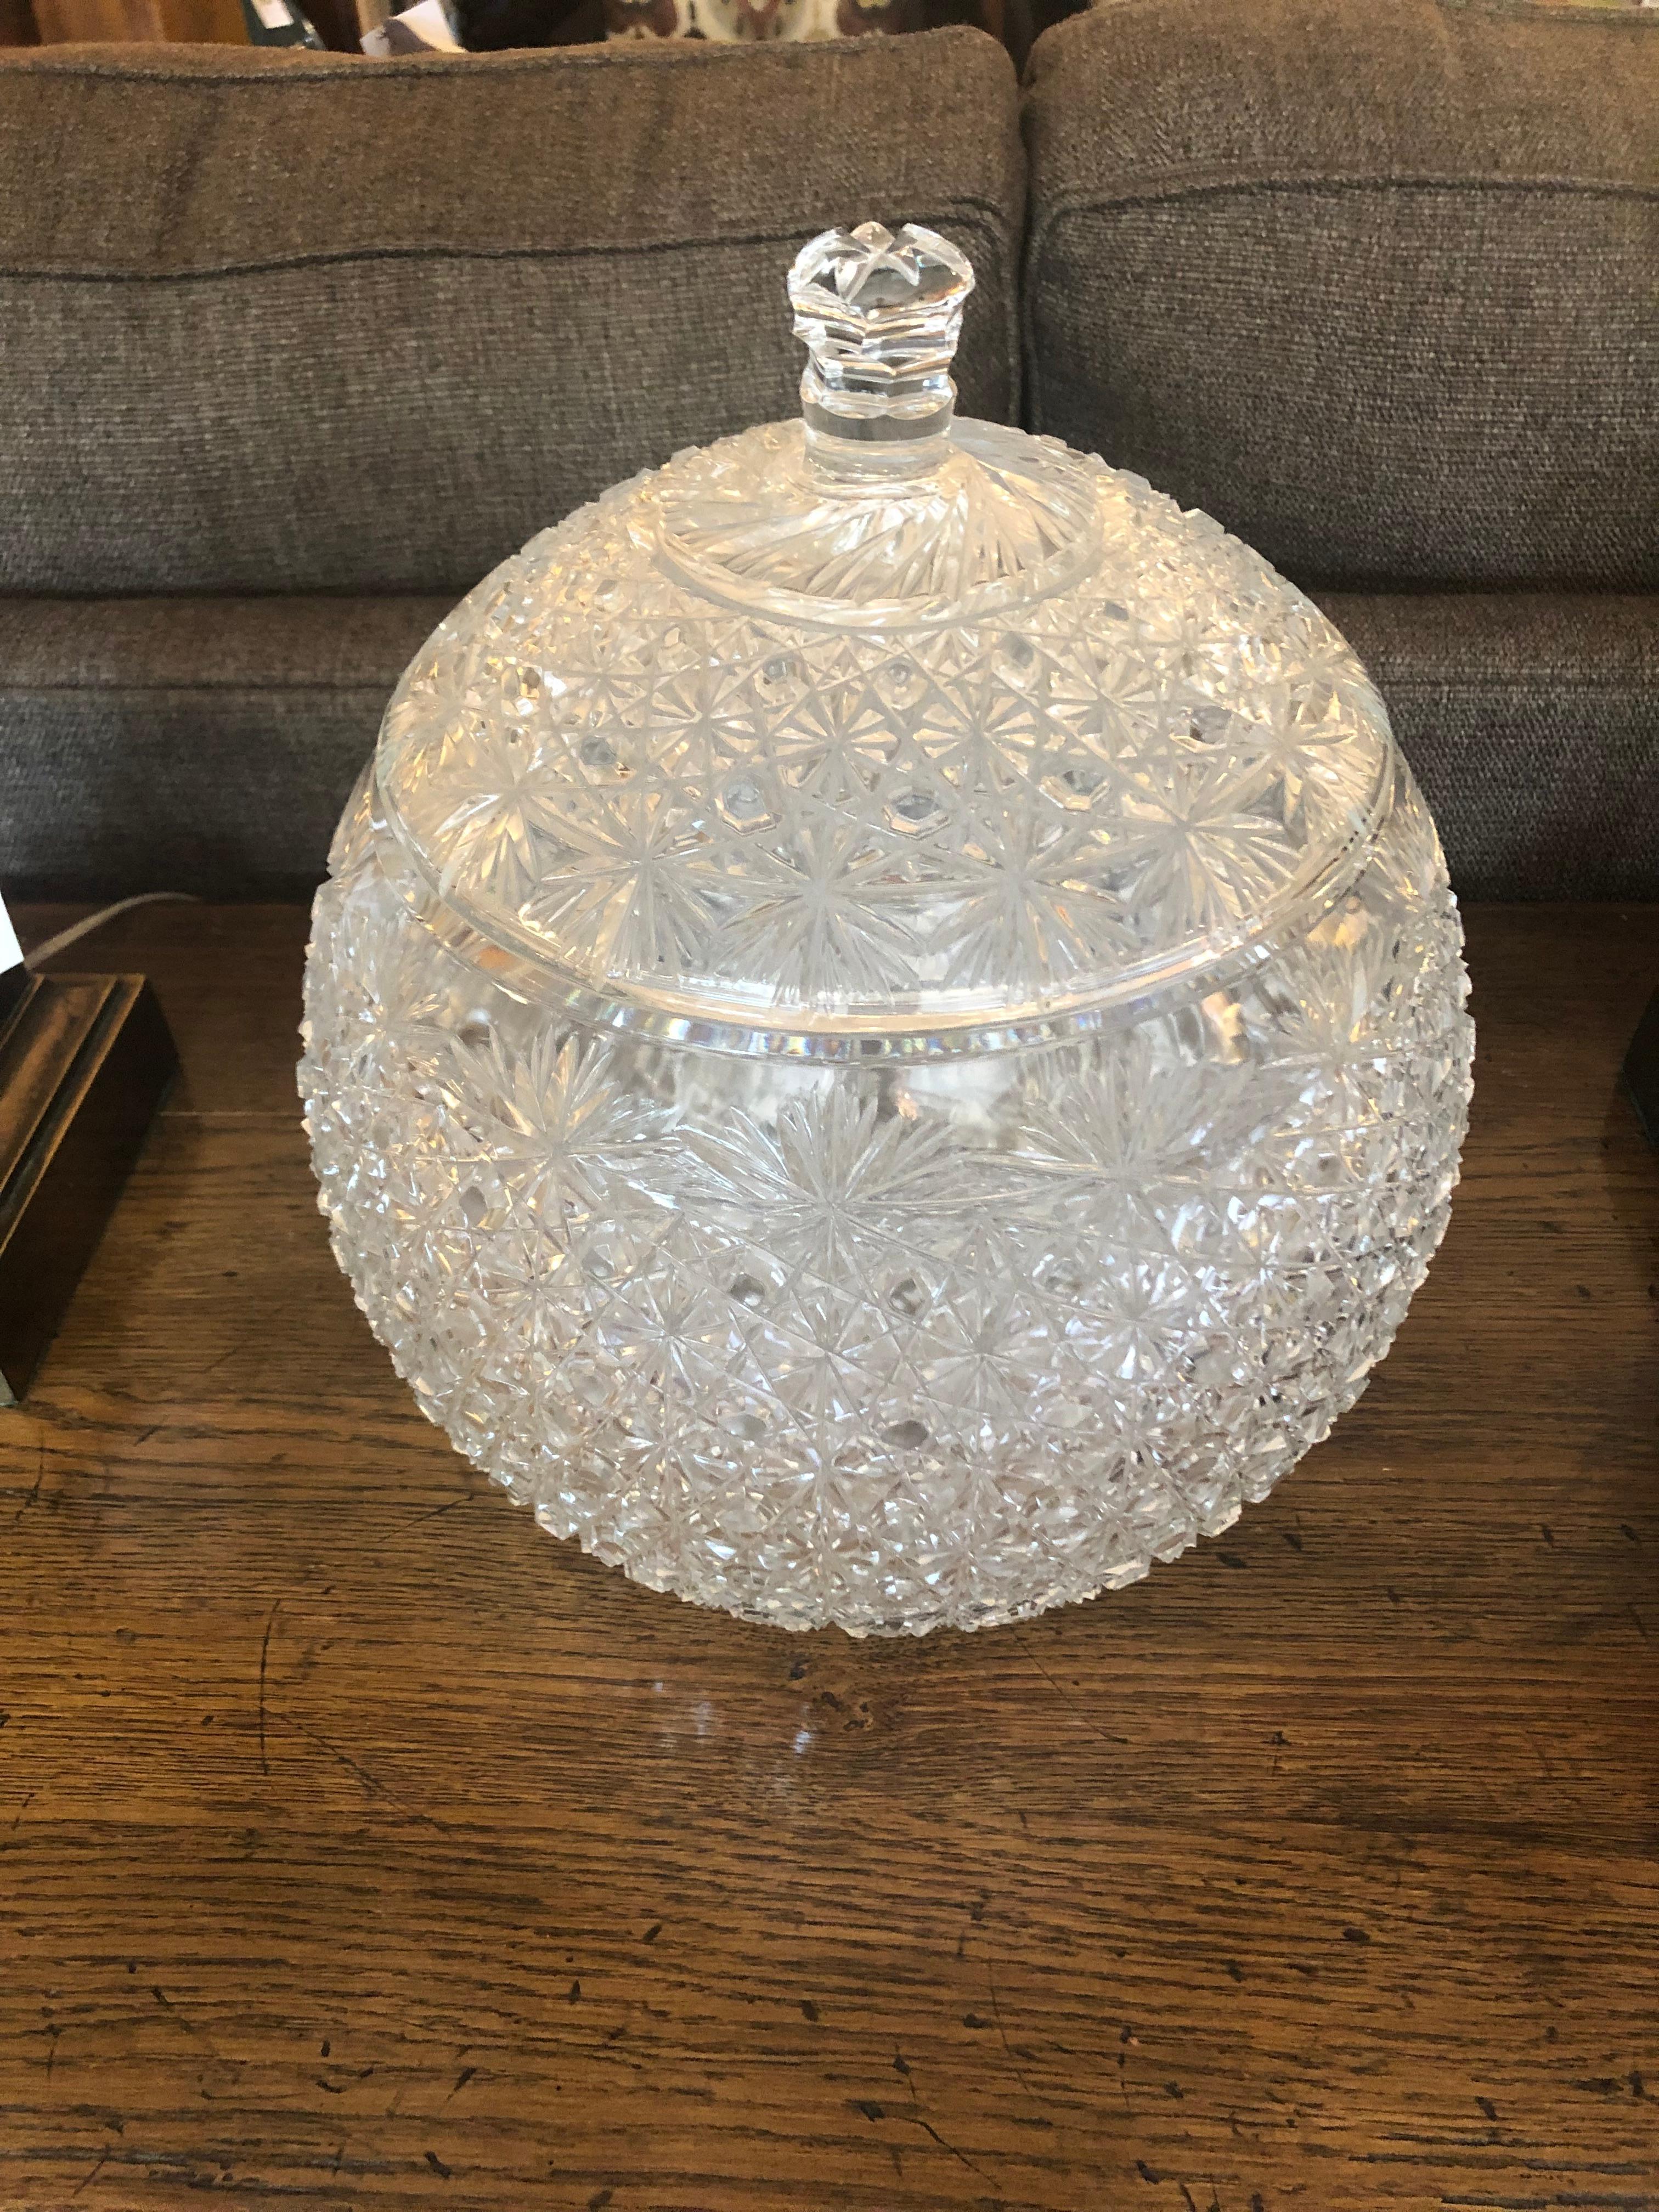 Eye catching glistening cut glass vessel with matching lid, very large and ornate.